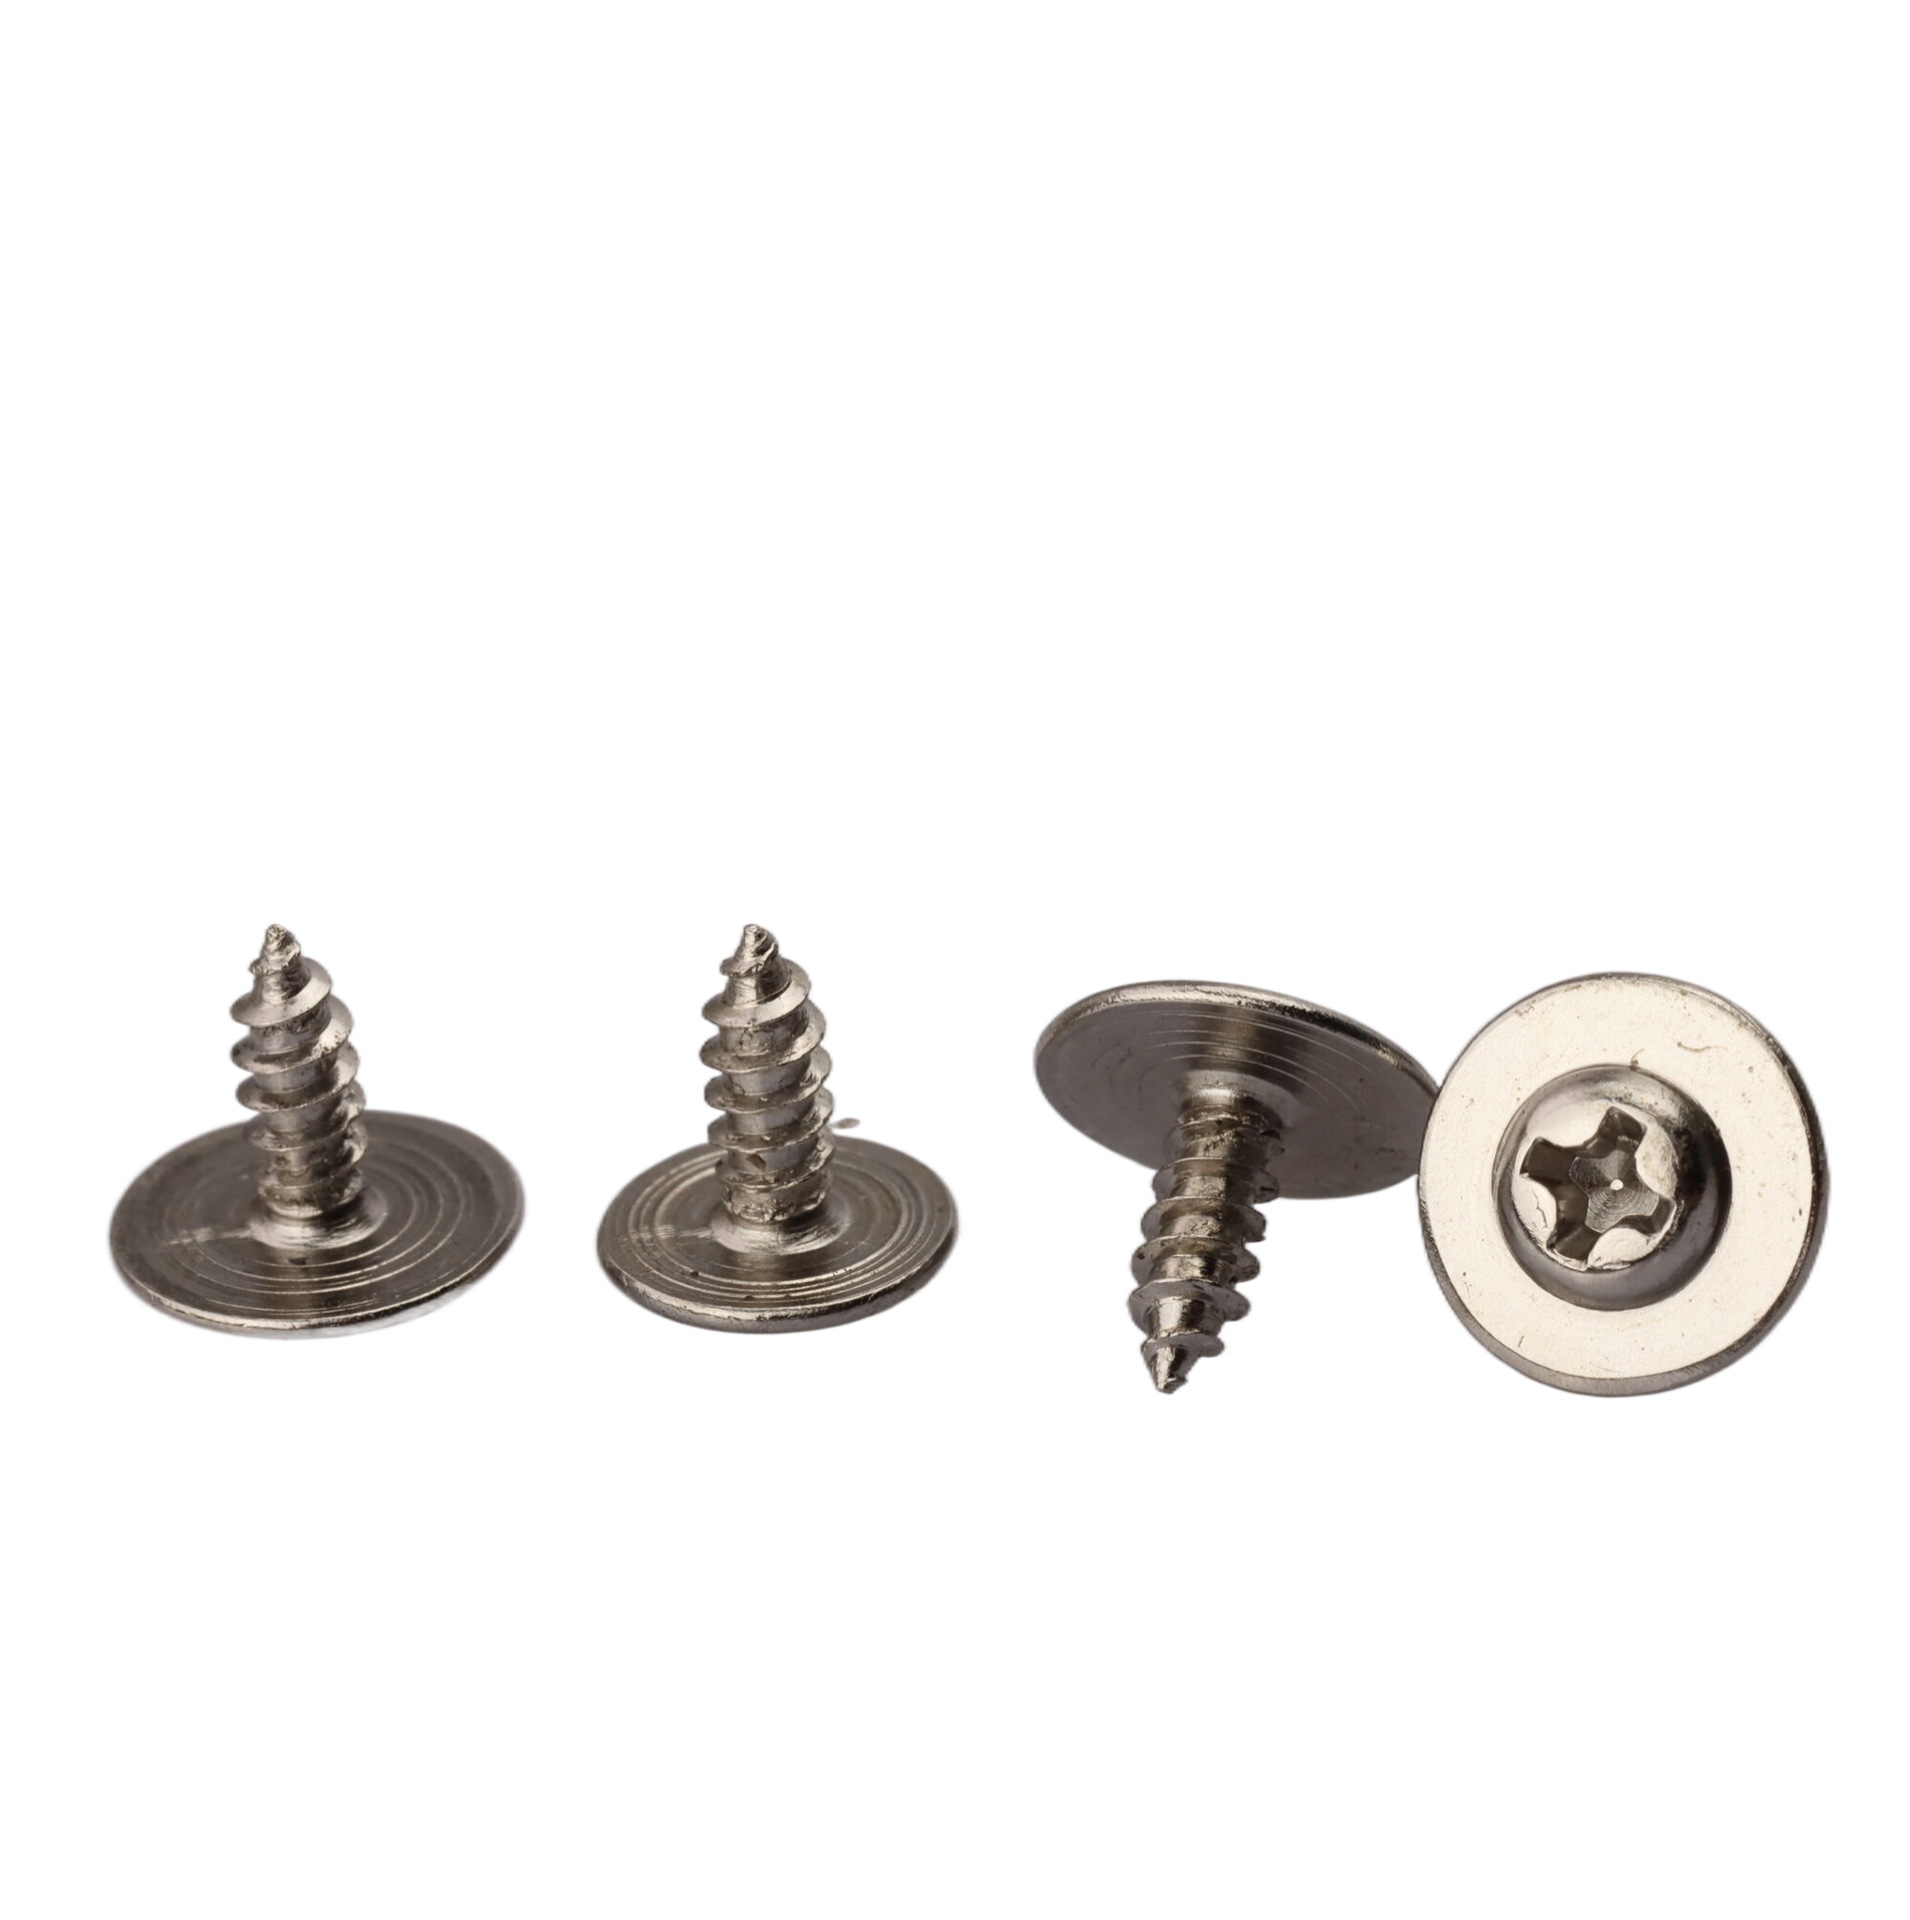 Pwa Nickel Plated Cross round Head Self-Tapping Pointed Tail Screw Plated Cross Recess Meson Head Screw